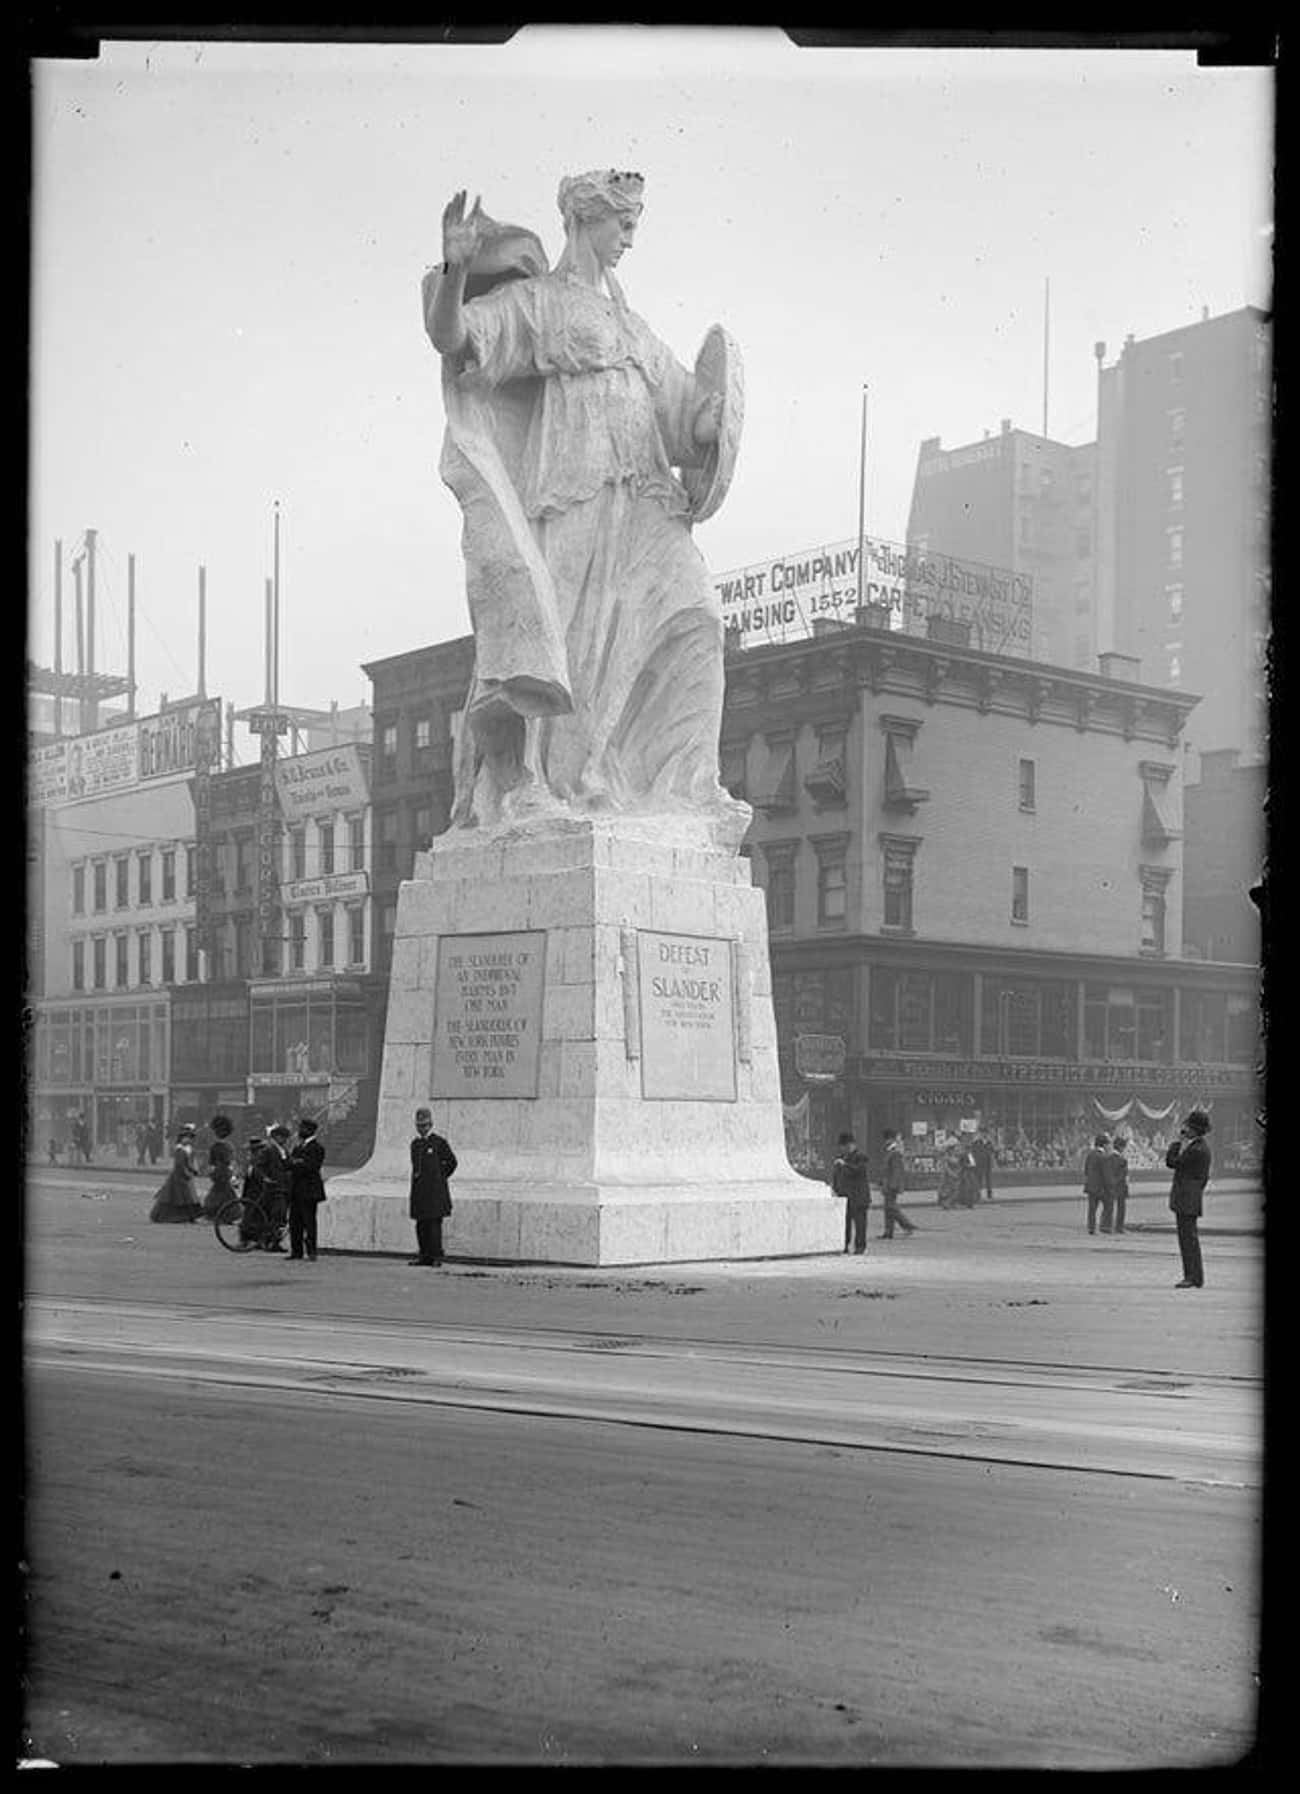 'Purity (Defeat of Slander)' Statue In What Would Become Times Square, 1910